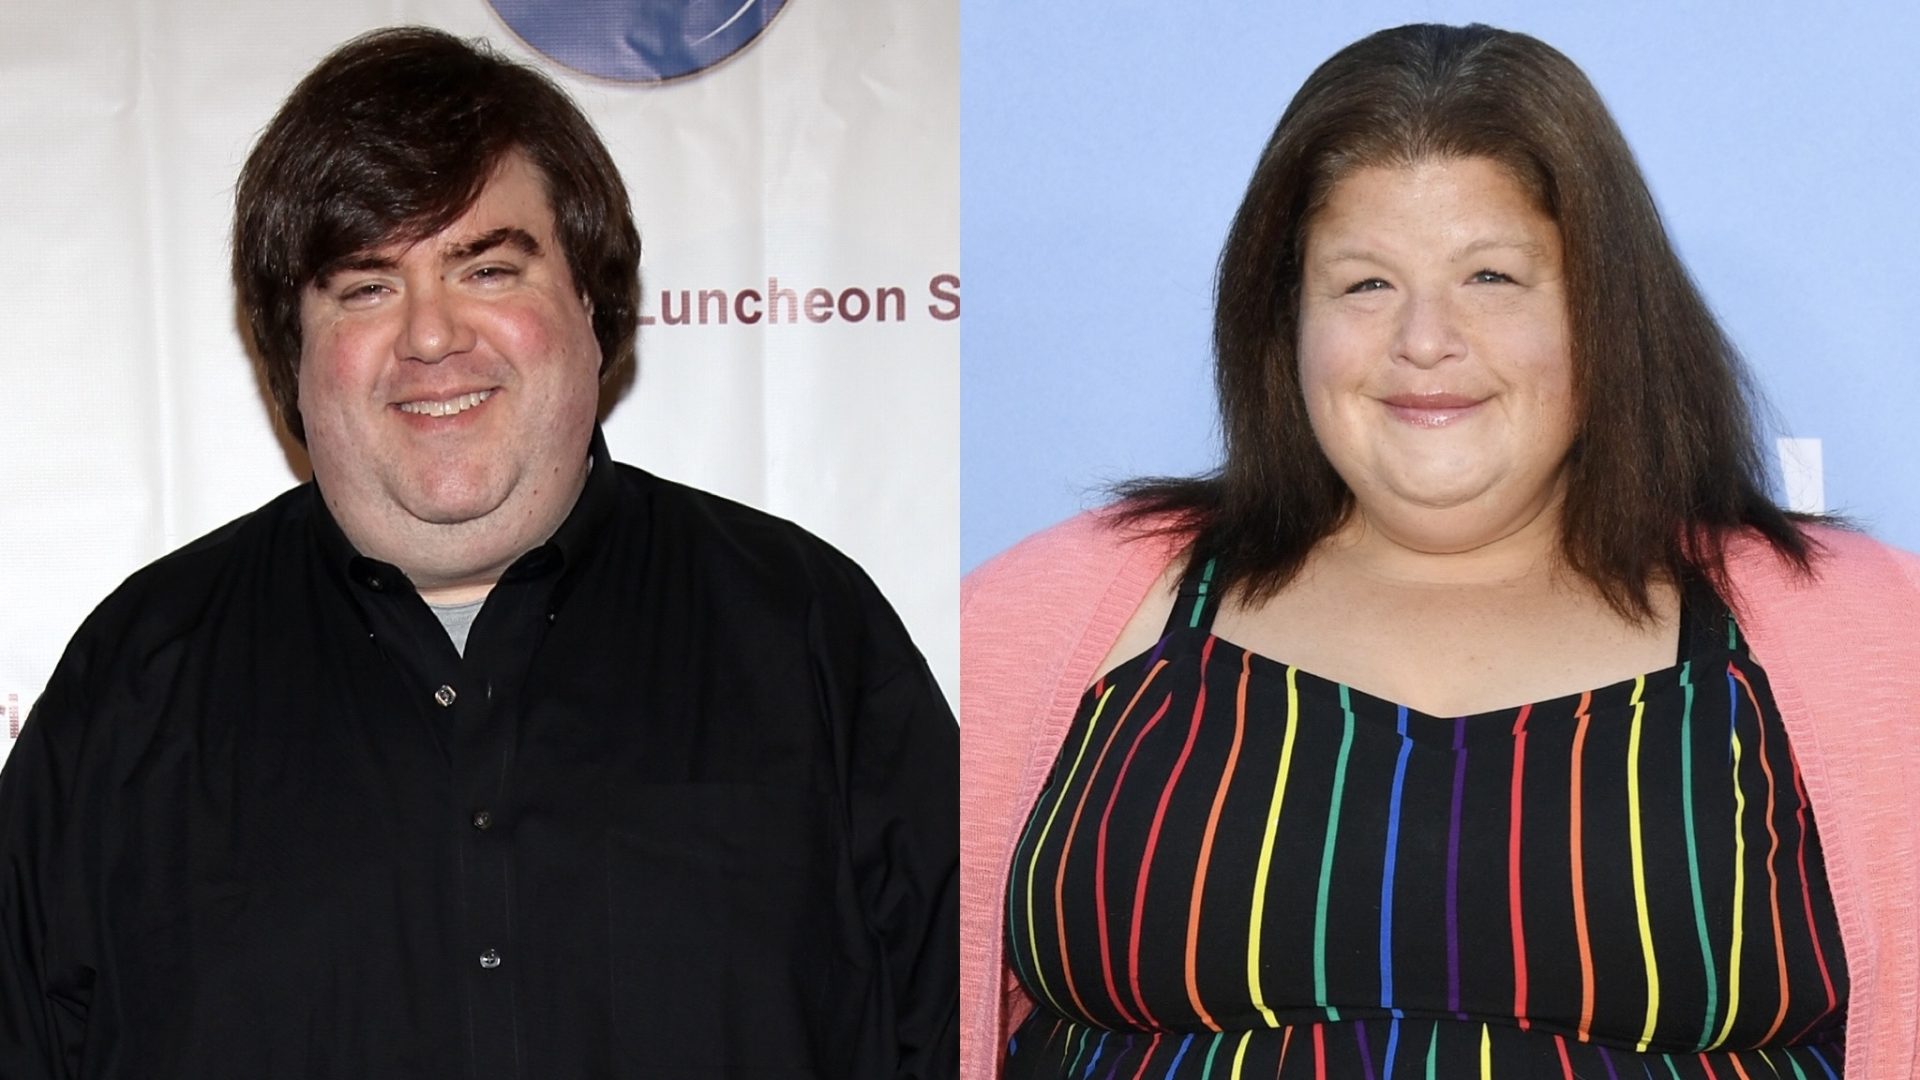 Dan Schneider Reacts After Former Nickeloden Star Lori Beth Denberg Accuses Him Of Sexual Misconduct thumbnail